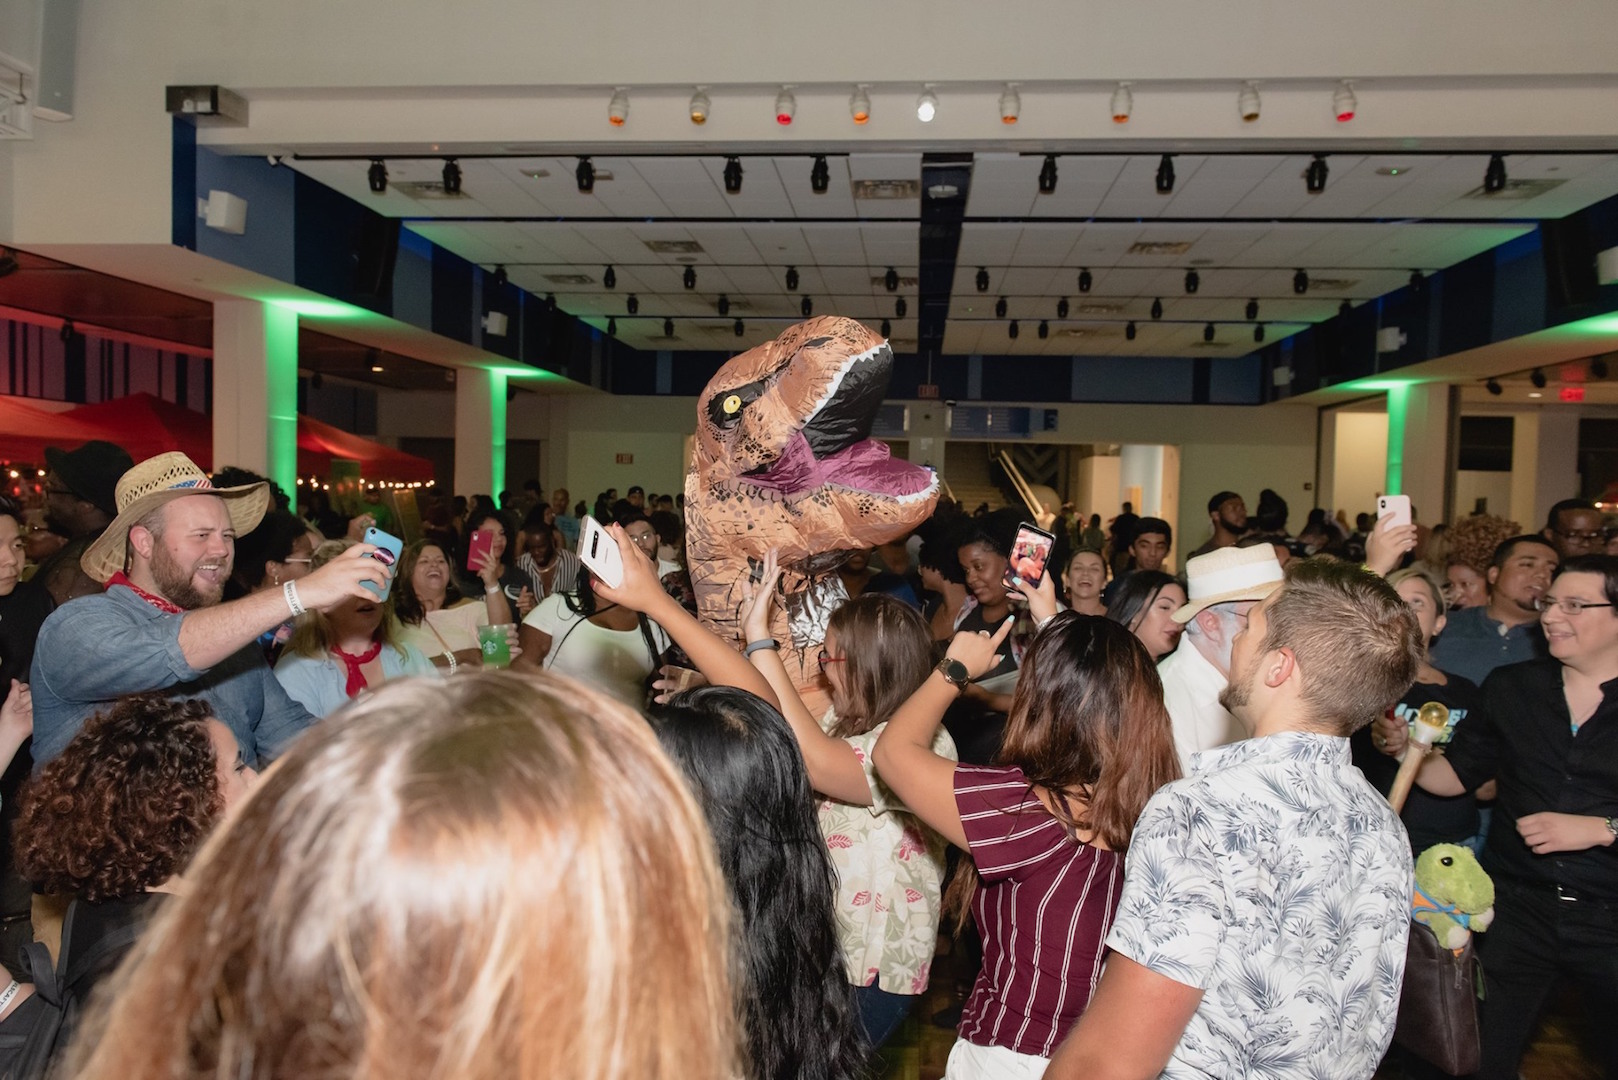 Guests party on the crowded dance floor with a dinosaur costume character